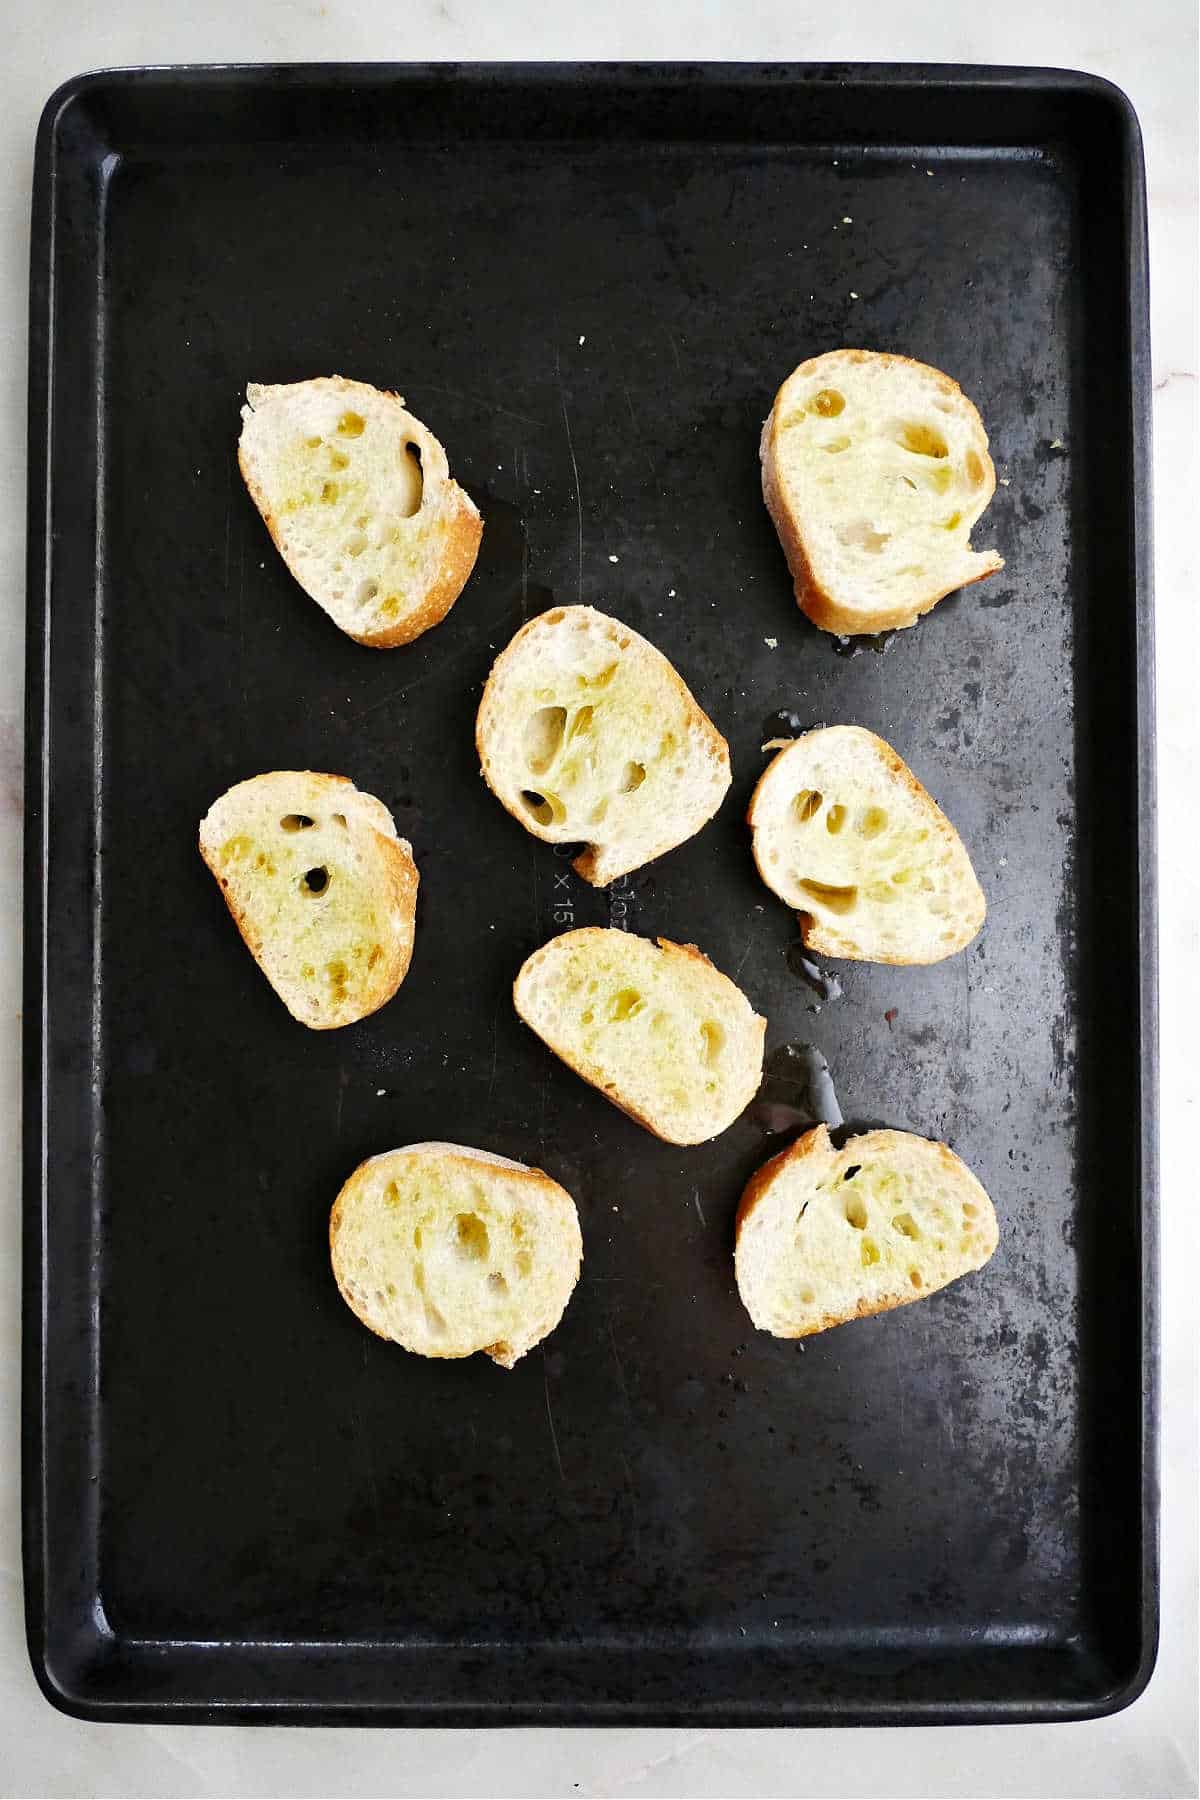 seven slices of baguette brushed with olive oil on a baking sheet